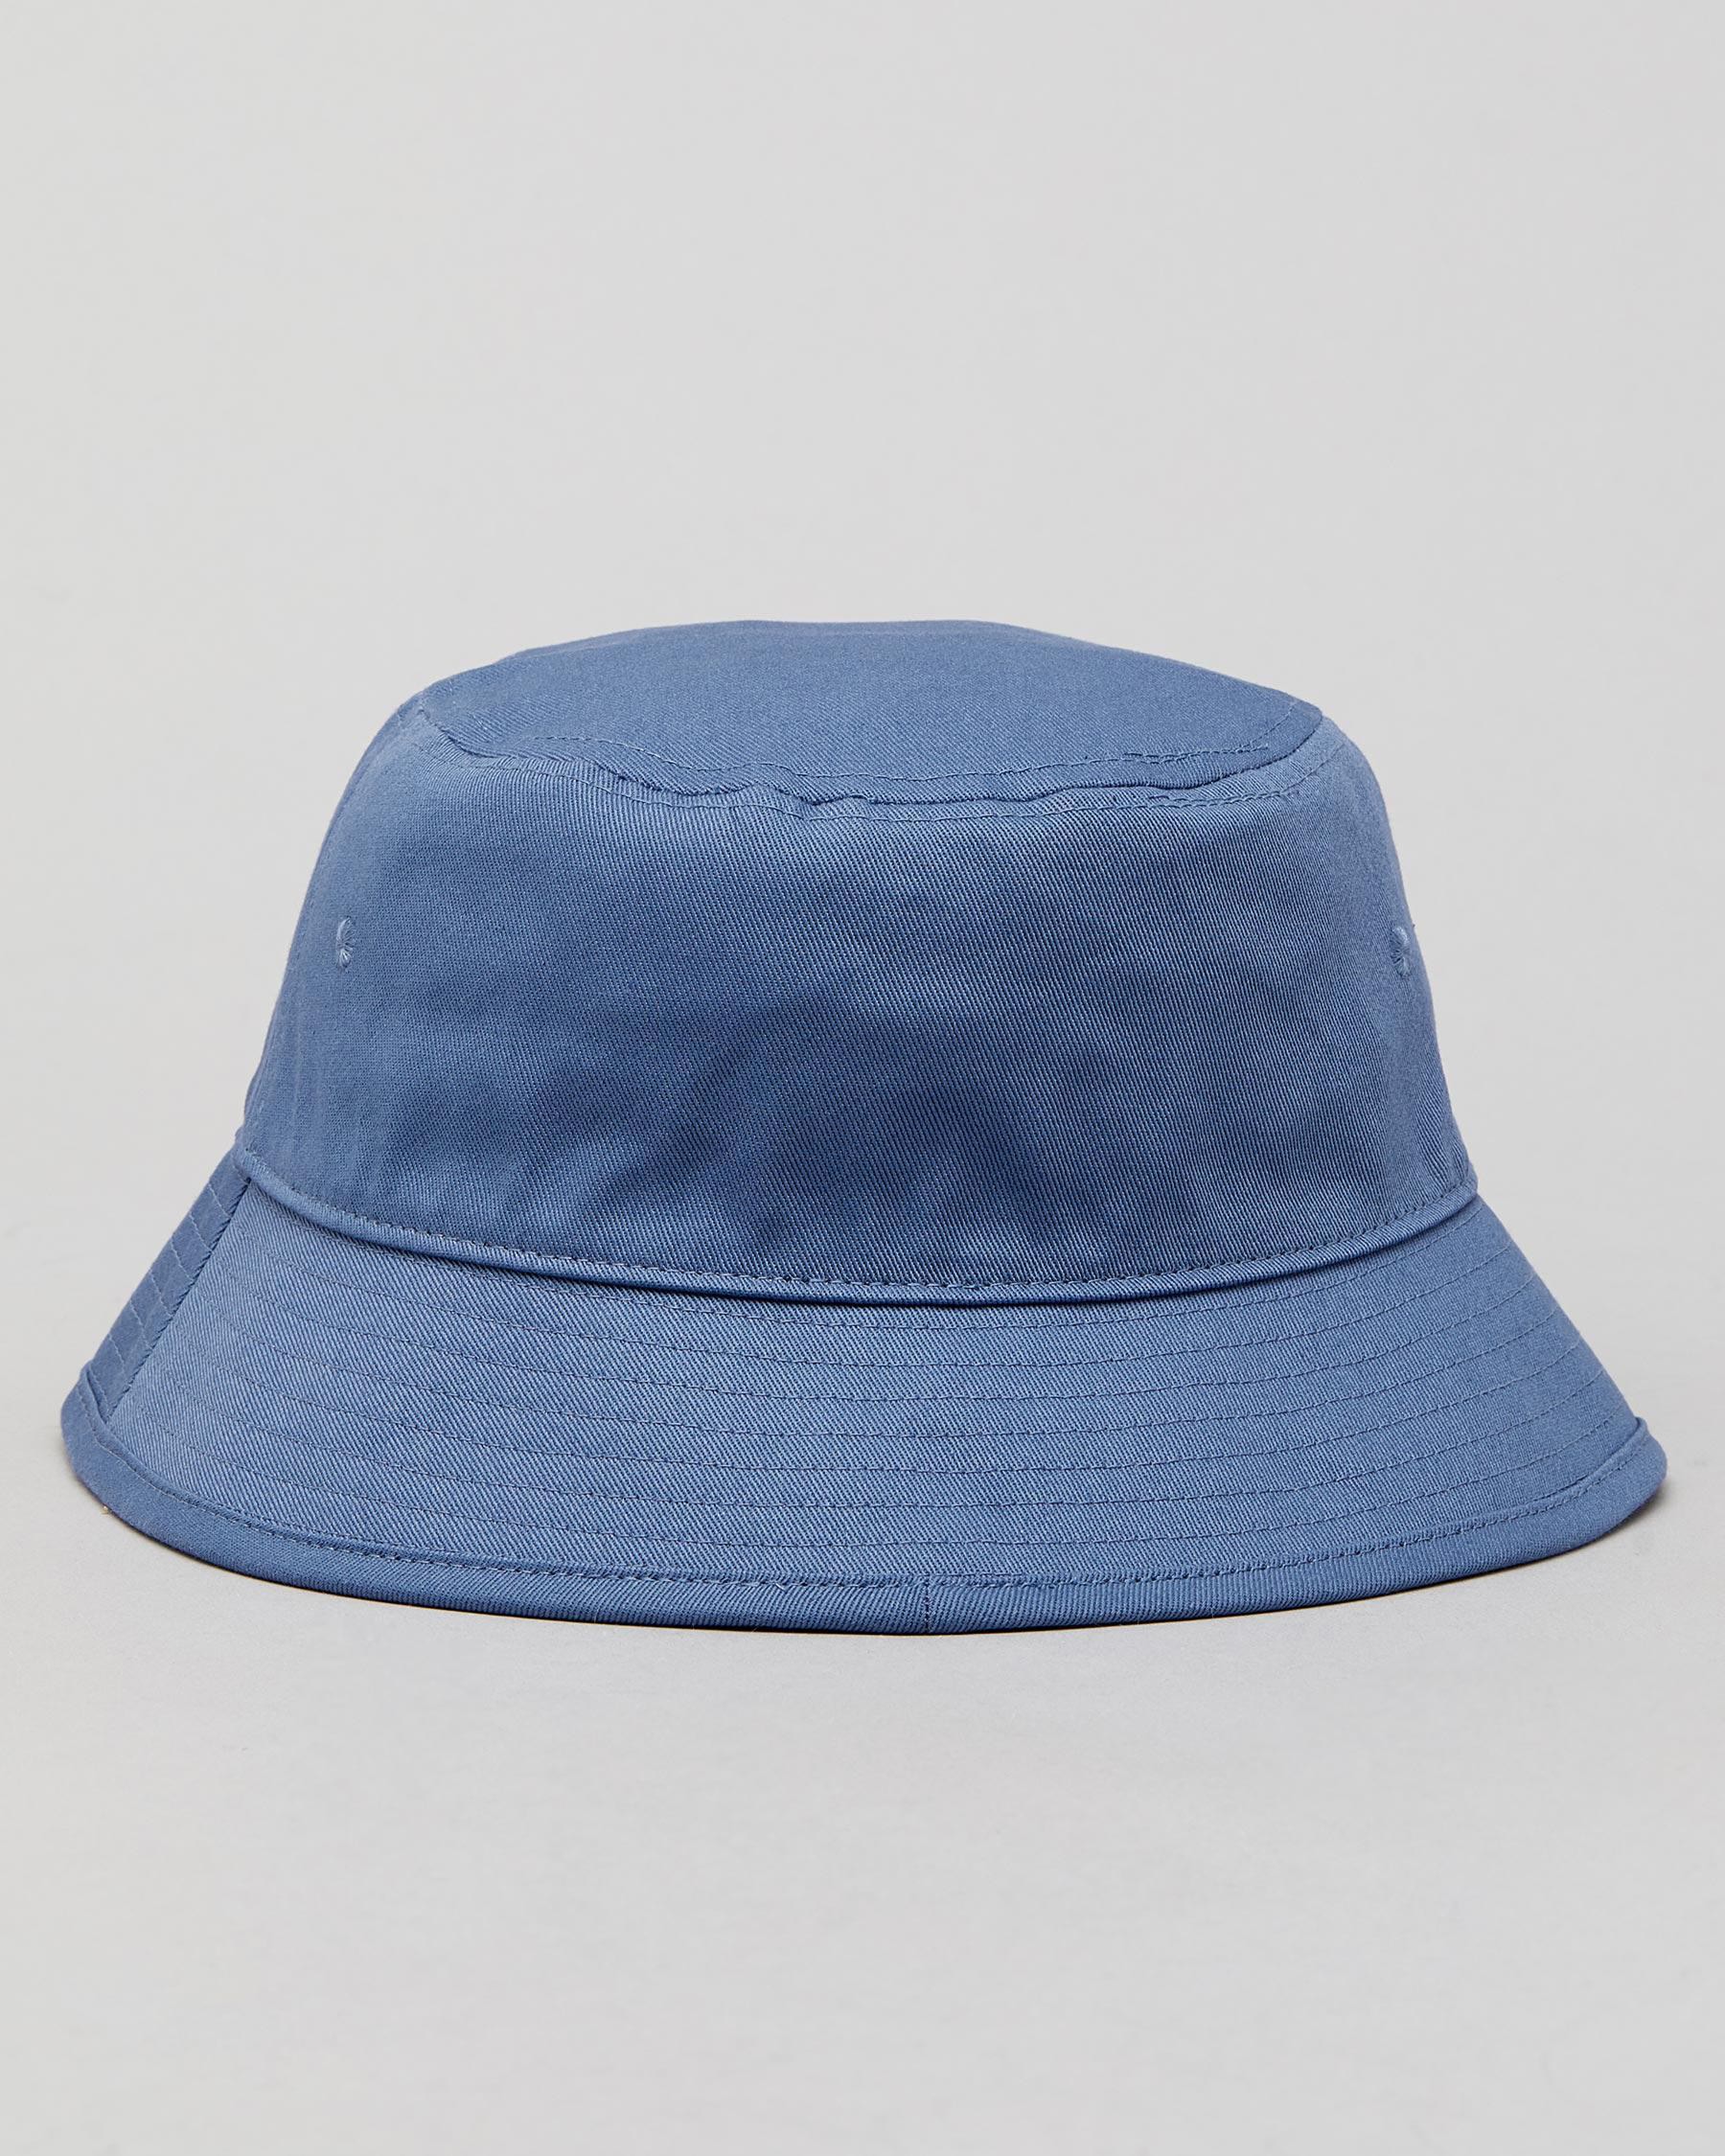 Adidas Classic Bucket Hat In Crew Blue / White - Fast Shipping & Easy ...